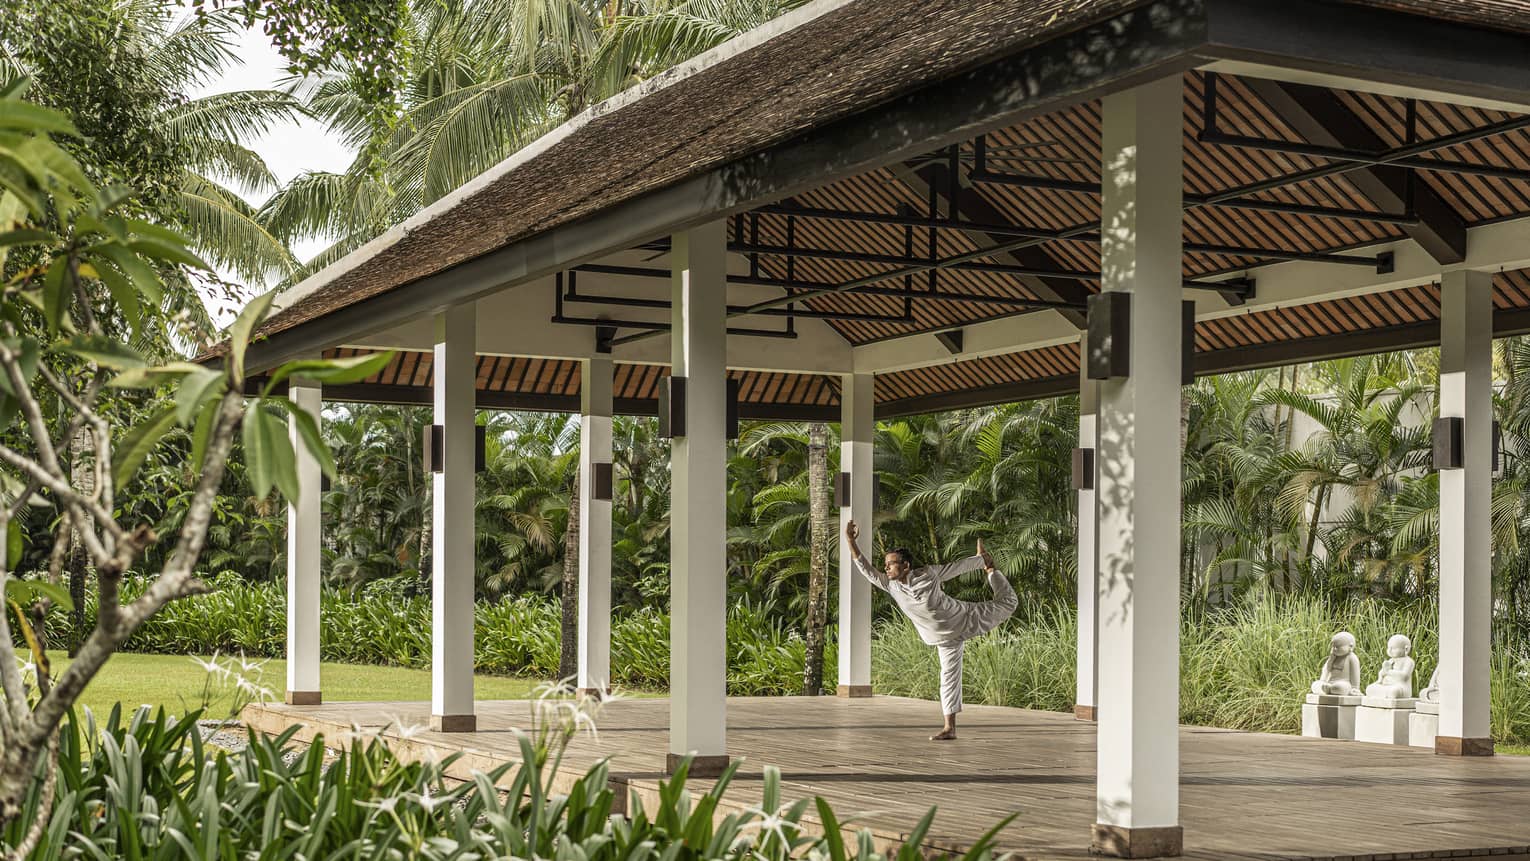 Man does yoga in outdoor yoga pavilion surrounded by palm trees